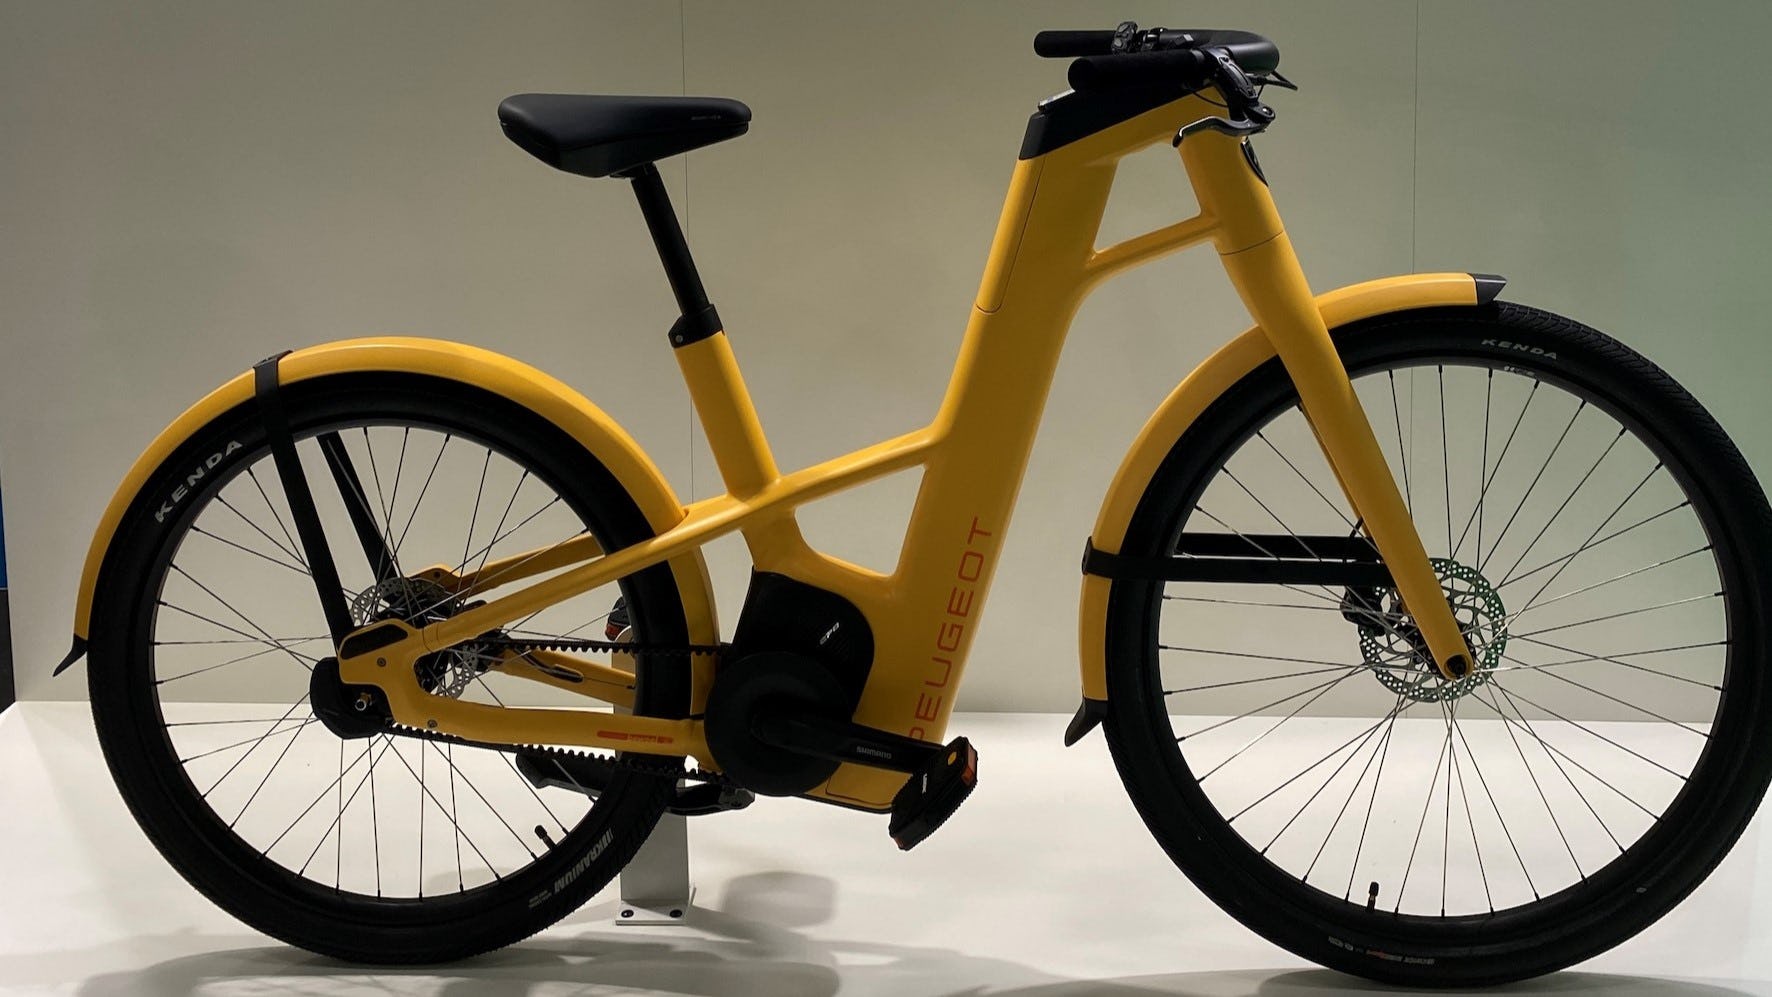 Among Peugeot Cycles' three new e-bikes, the Digital eBike is a futuristic-looking connected bike with belt drive and Shimano EP8 drive system. - Michel de Chavanon